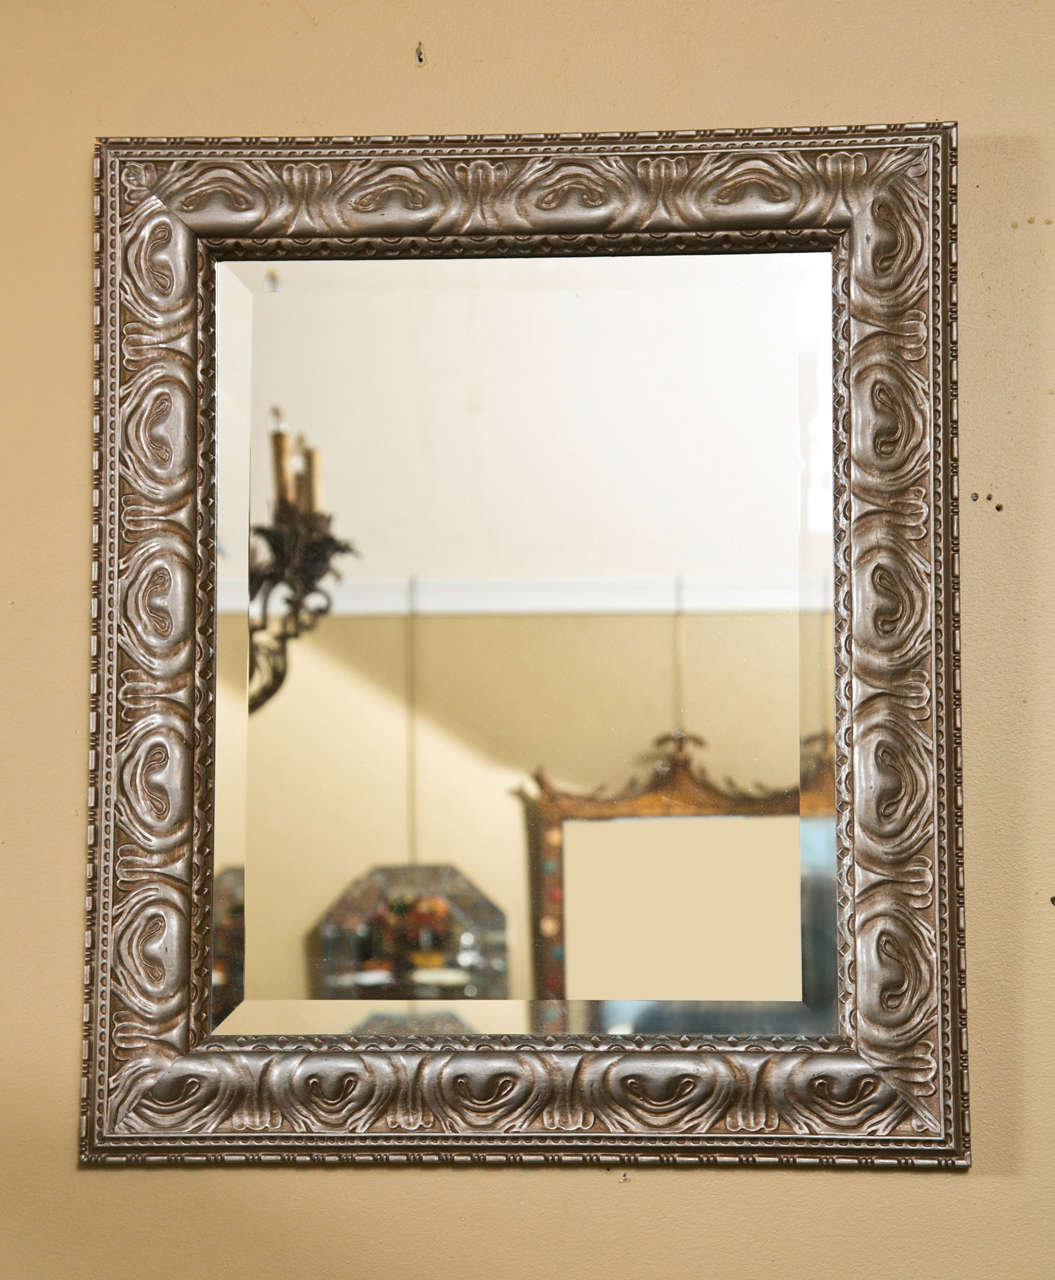 Pair of beautiful silver gilt mirrors, each has a beveled rectangular glass surmounted in a carved wood frame in silver-gilt finish. Manner of Jansen.